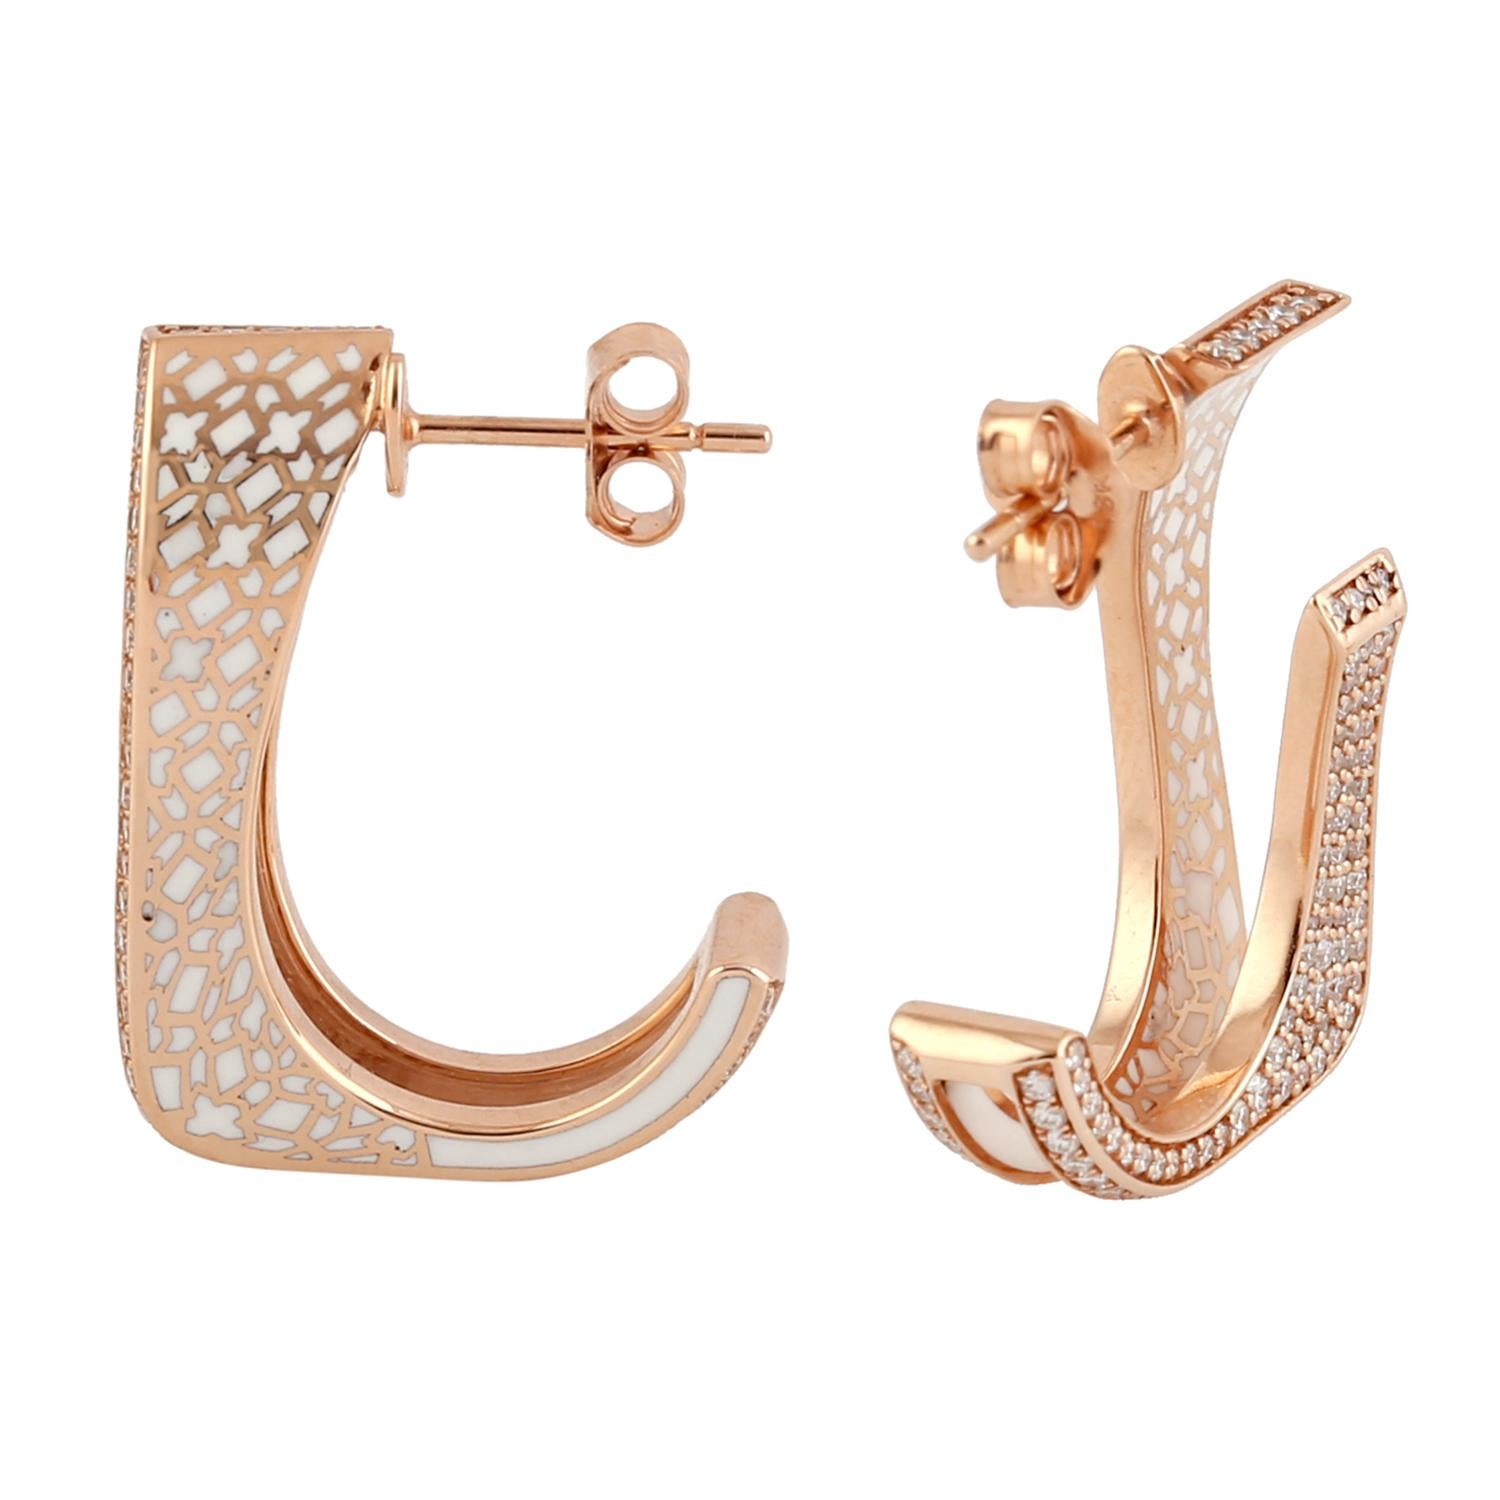 Mixed Cut Boutique Ceramic Tile Pattern in a Hook Shape Hoop Earring Made in 18k Rose Gold For Sale